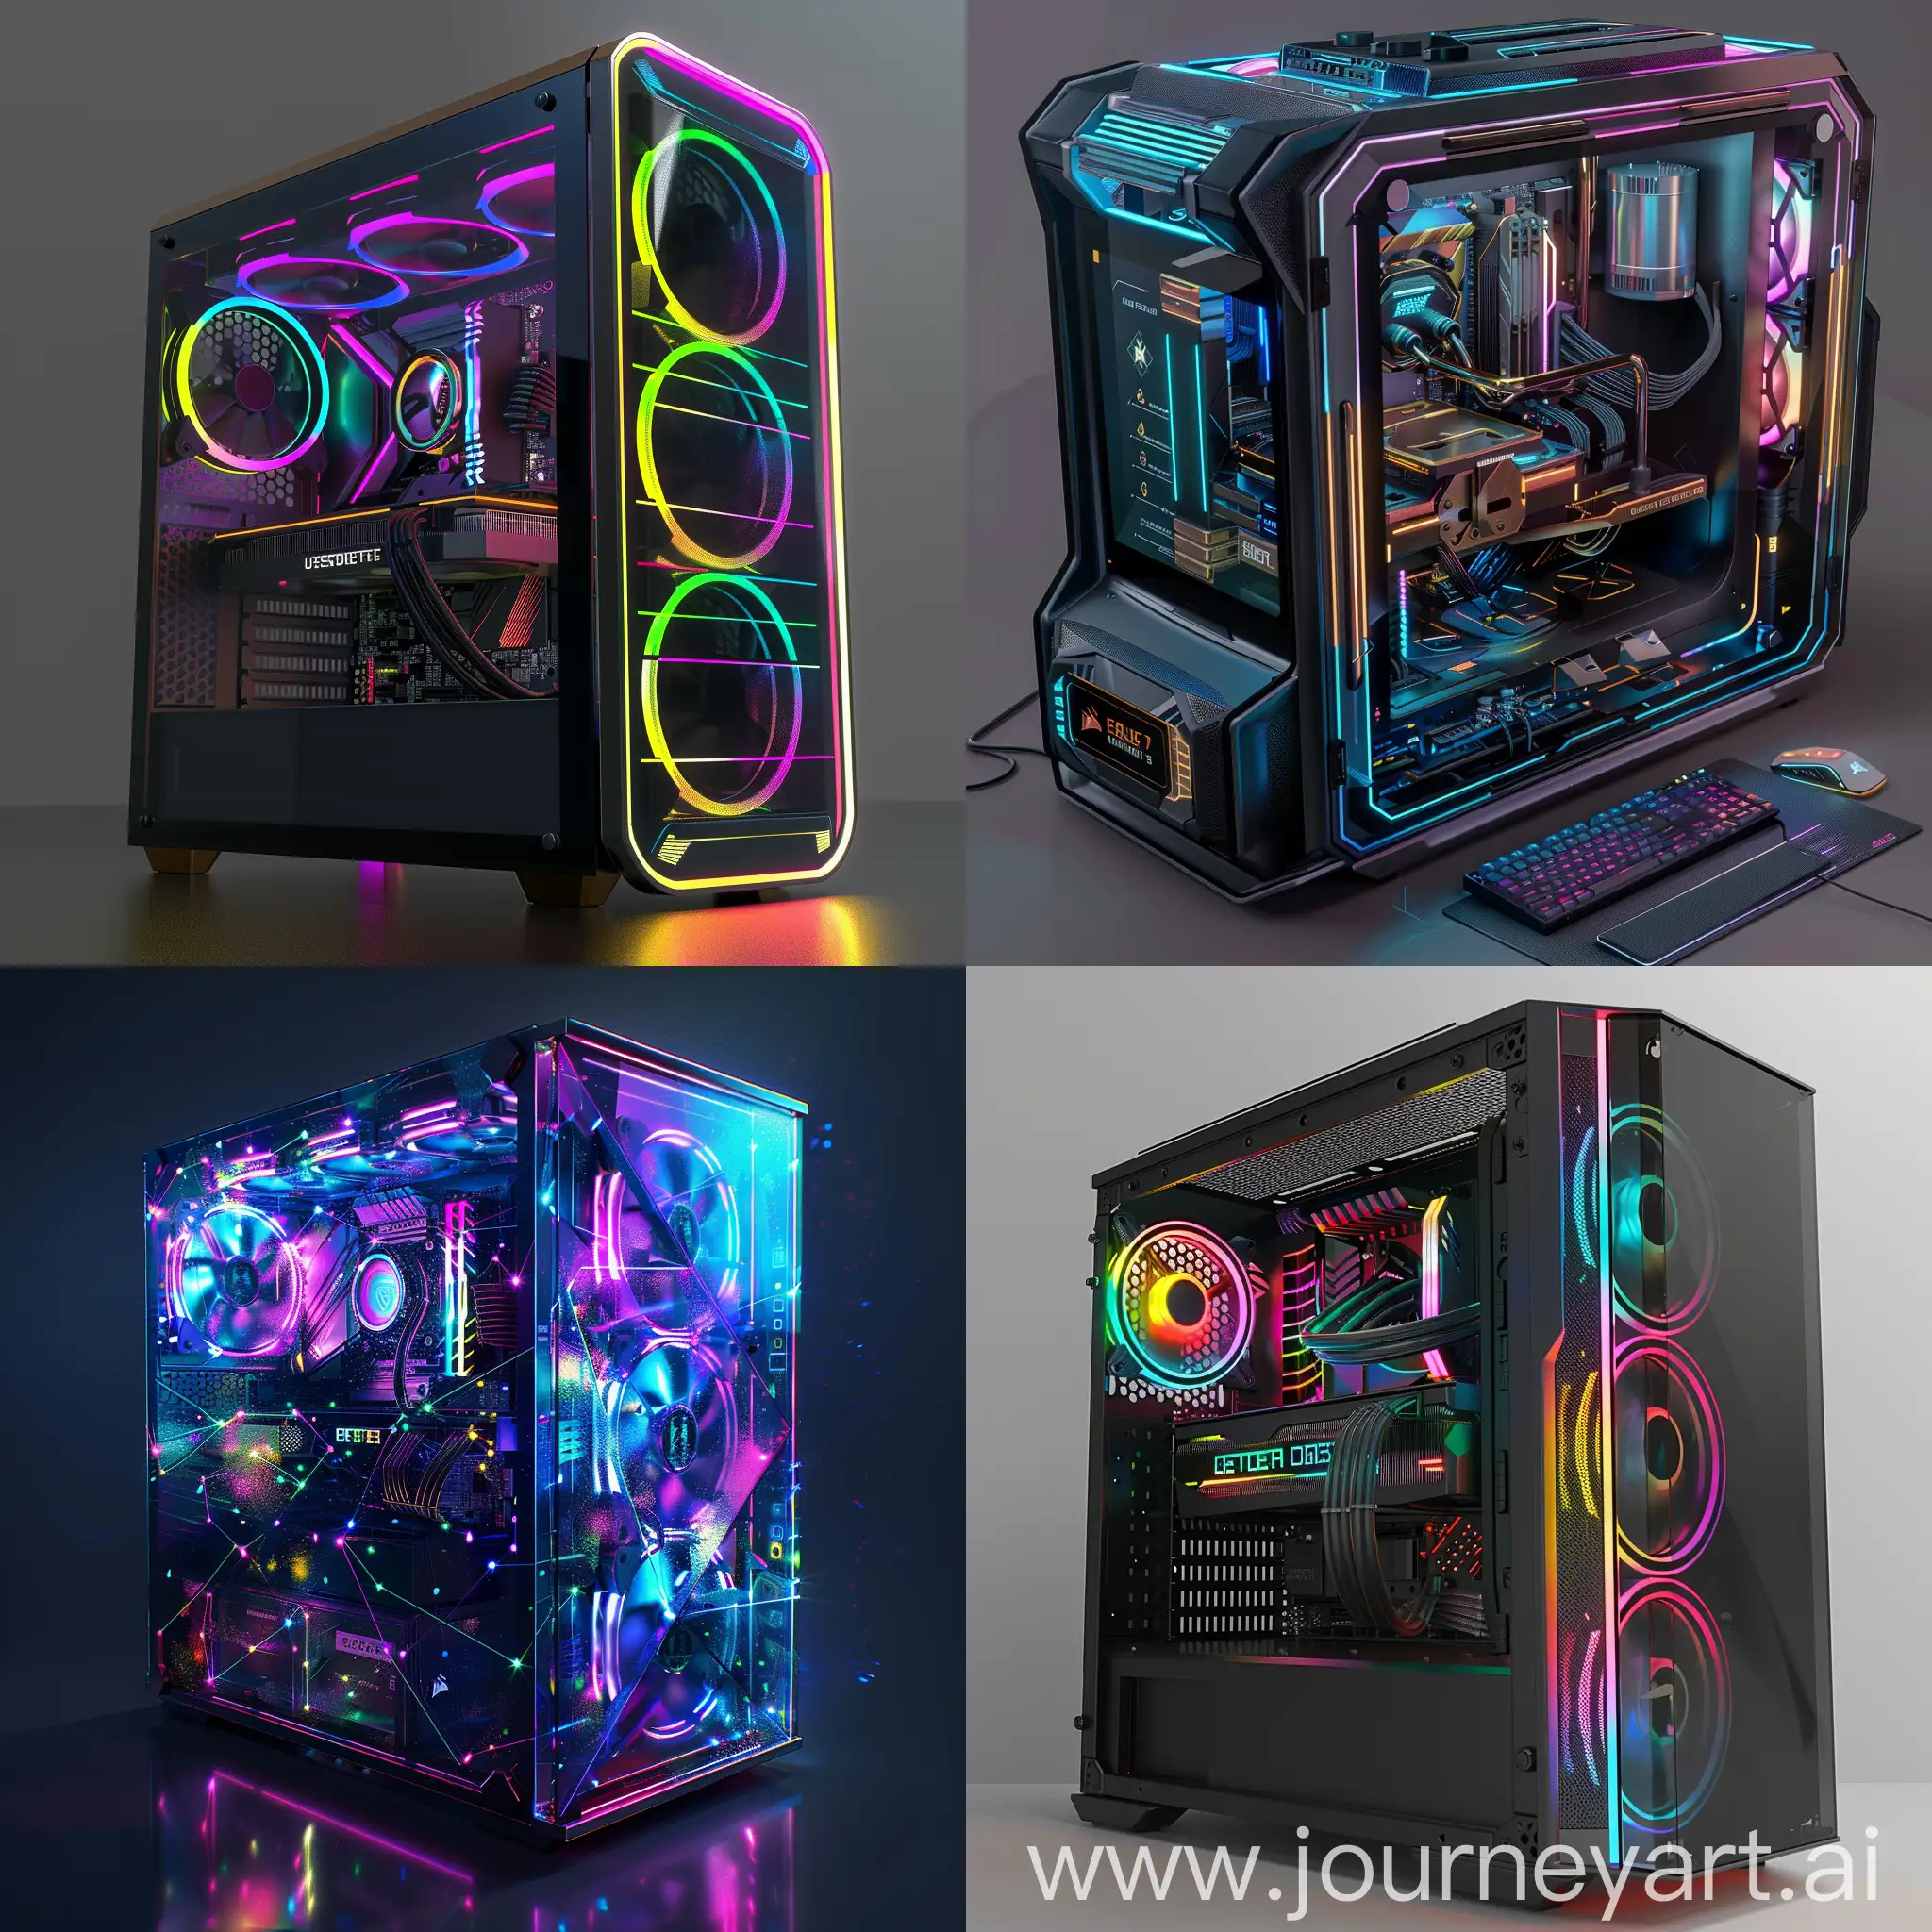 Futuristic-Modular-PC-Case-with-Integrated-RGB-Lighting-and-Smart-Cooling-System